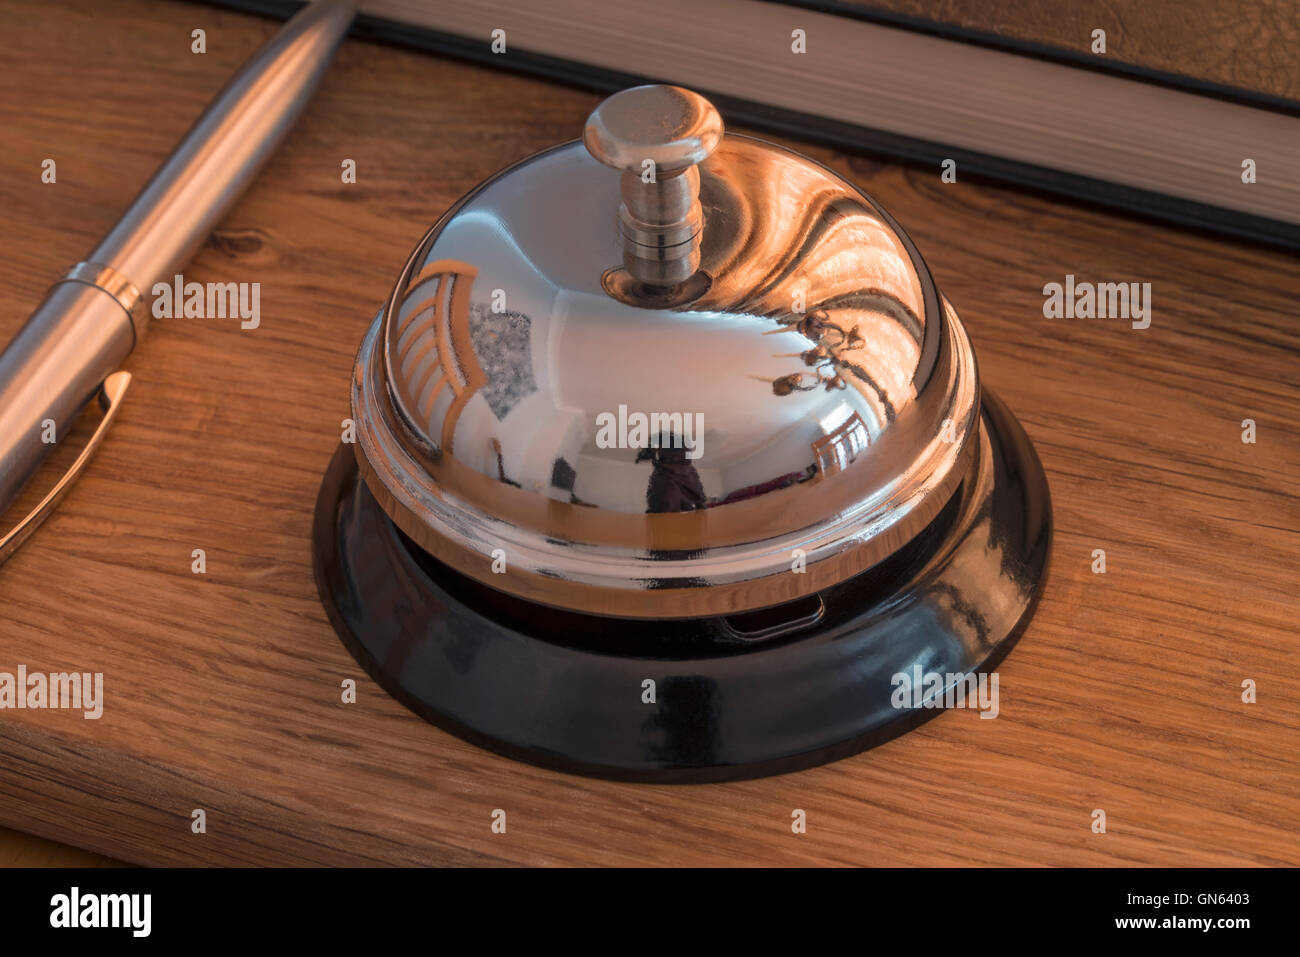 Hotel reception desk with a chrome service bell Stock Photo